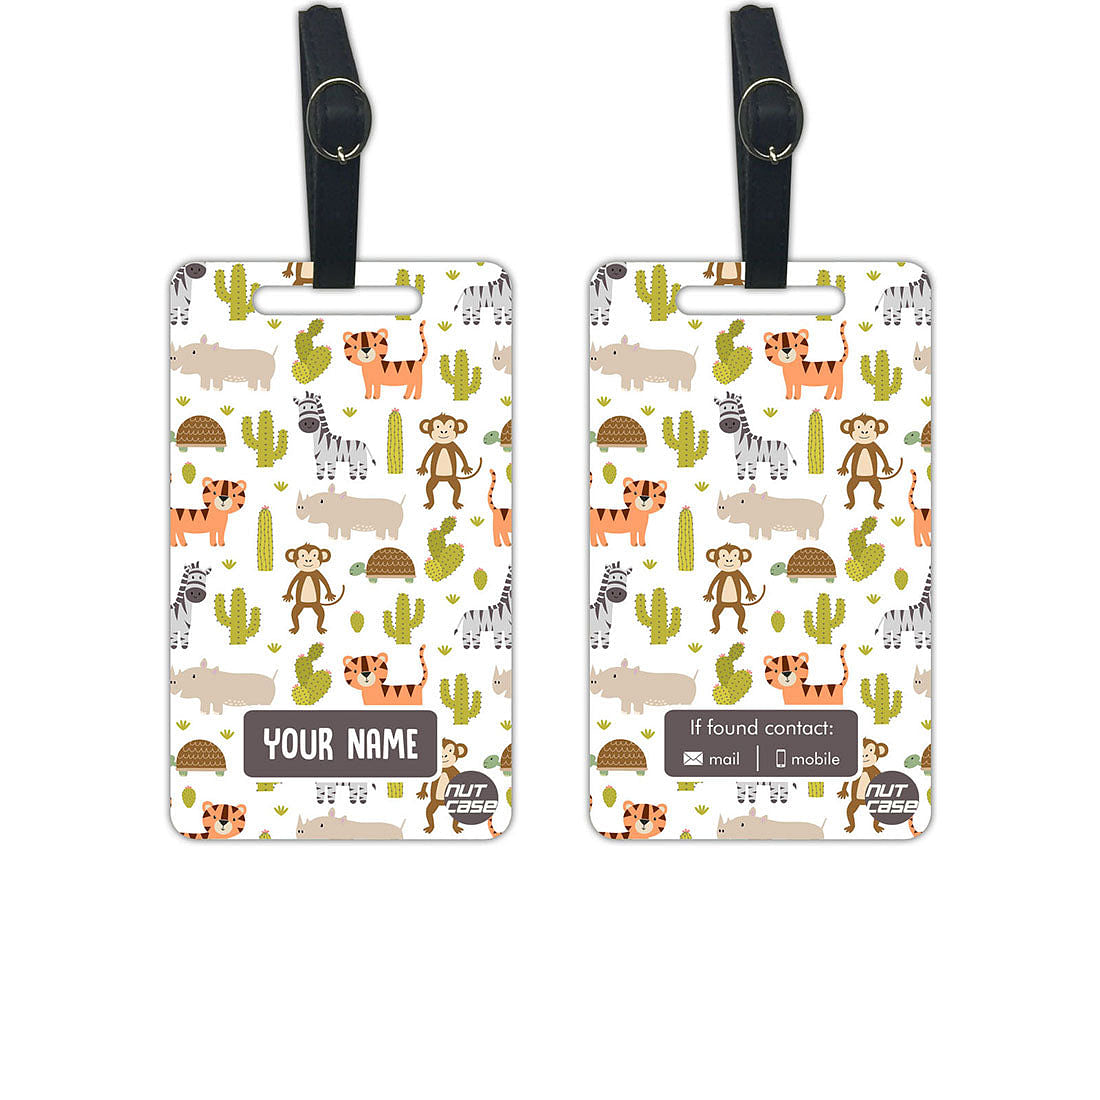 Custom-Made Children's Luggage Tag - Add your Name - Set of 2 Nutcase